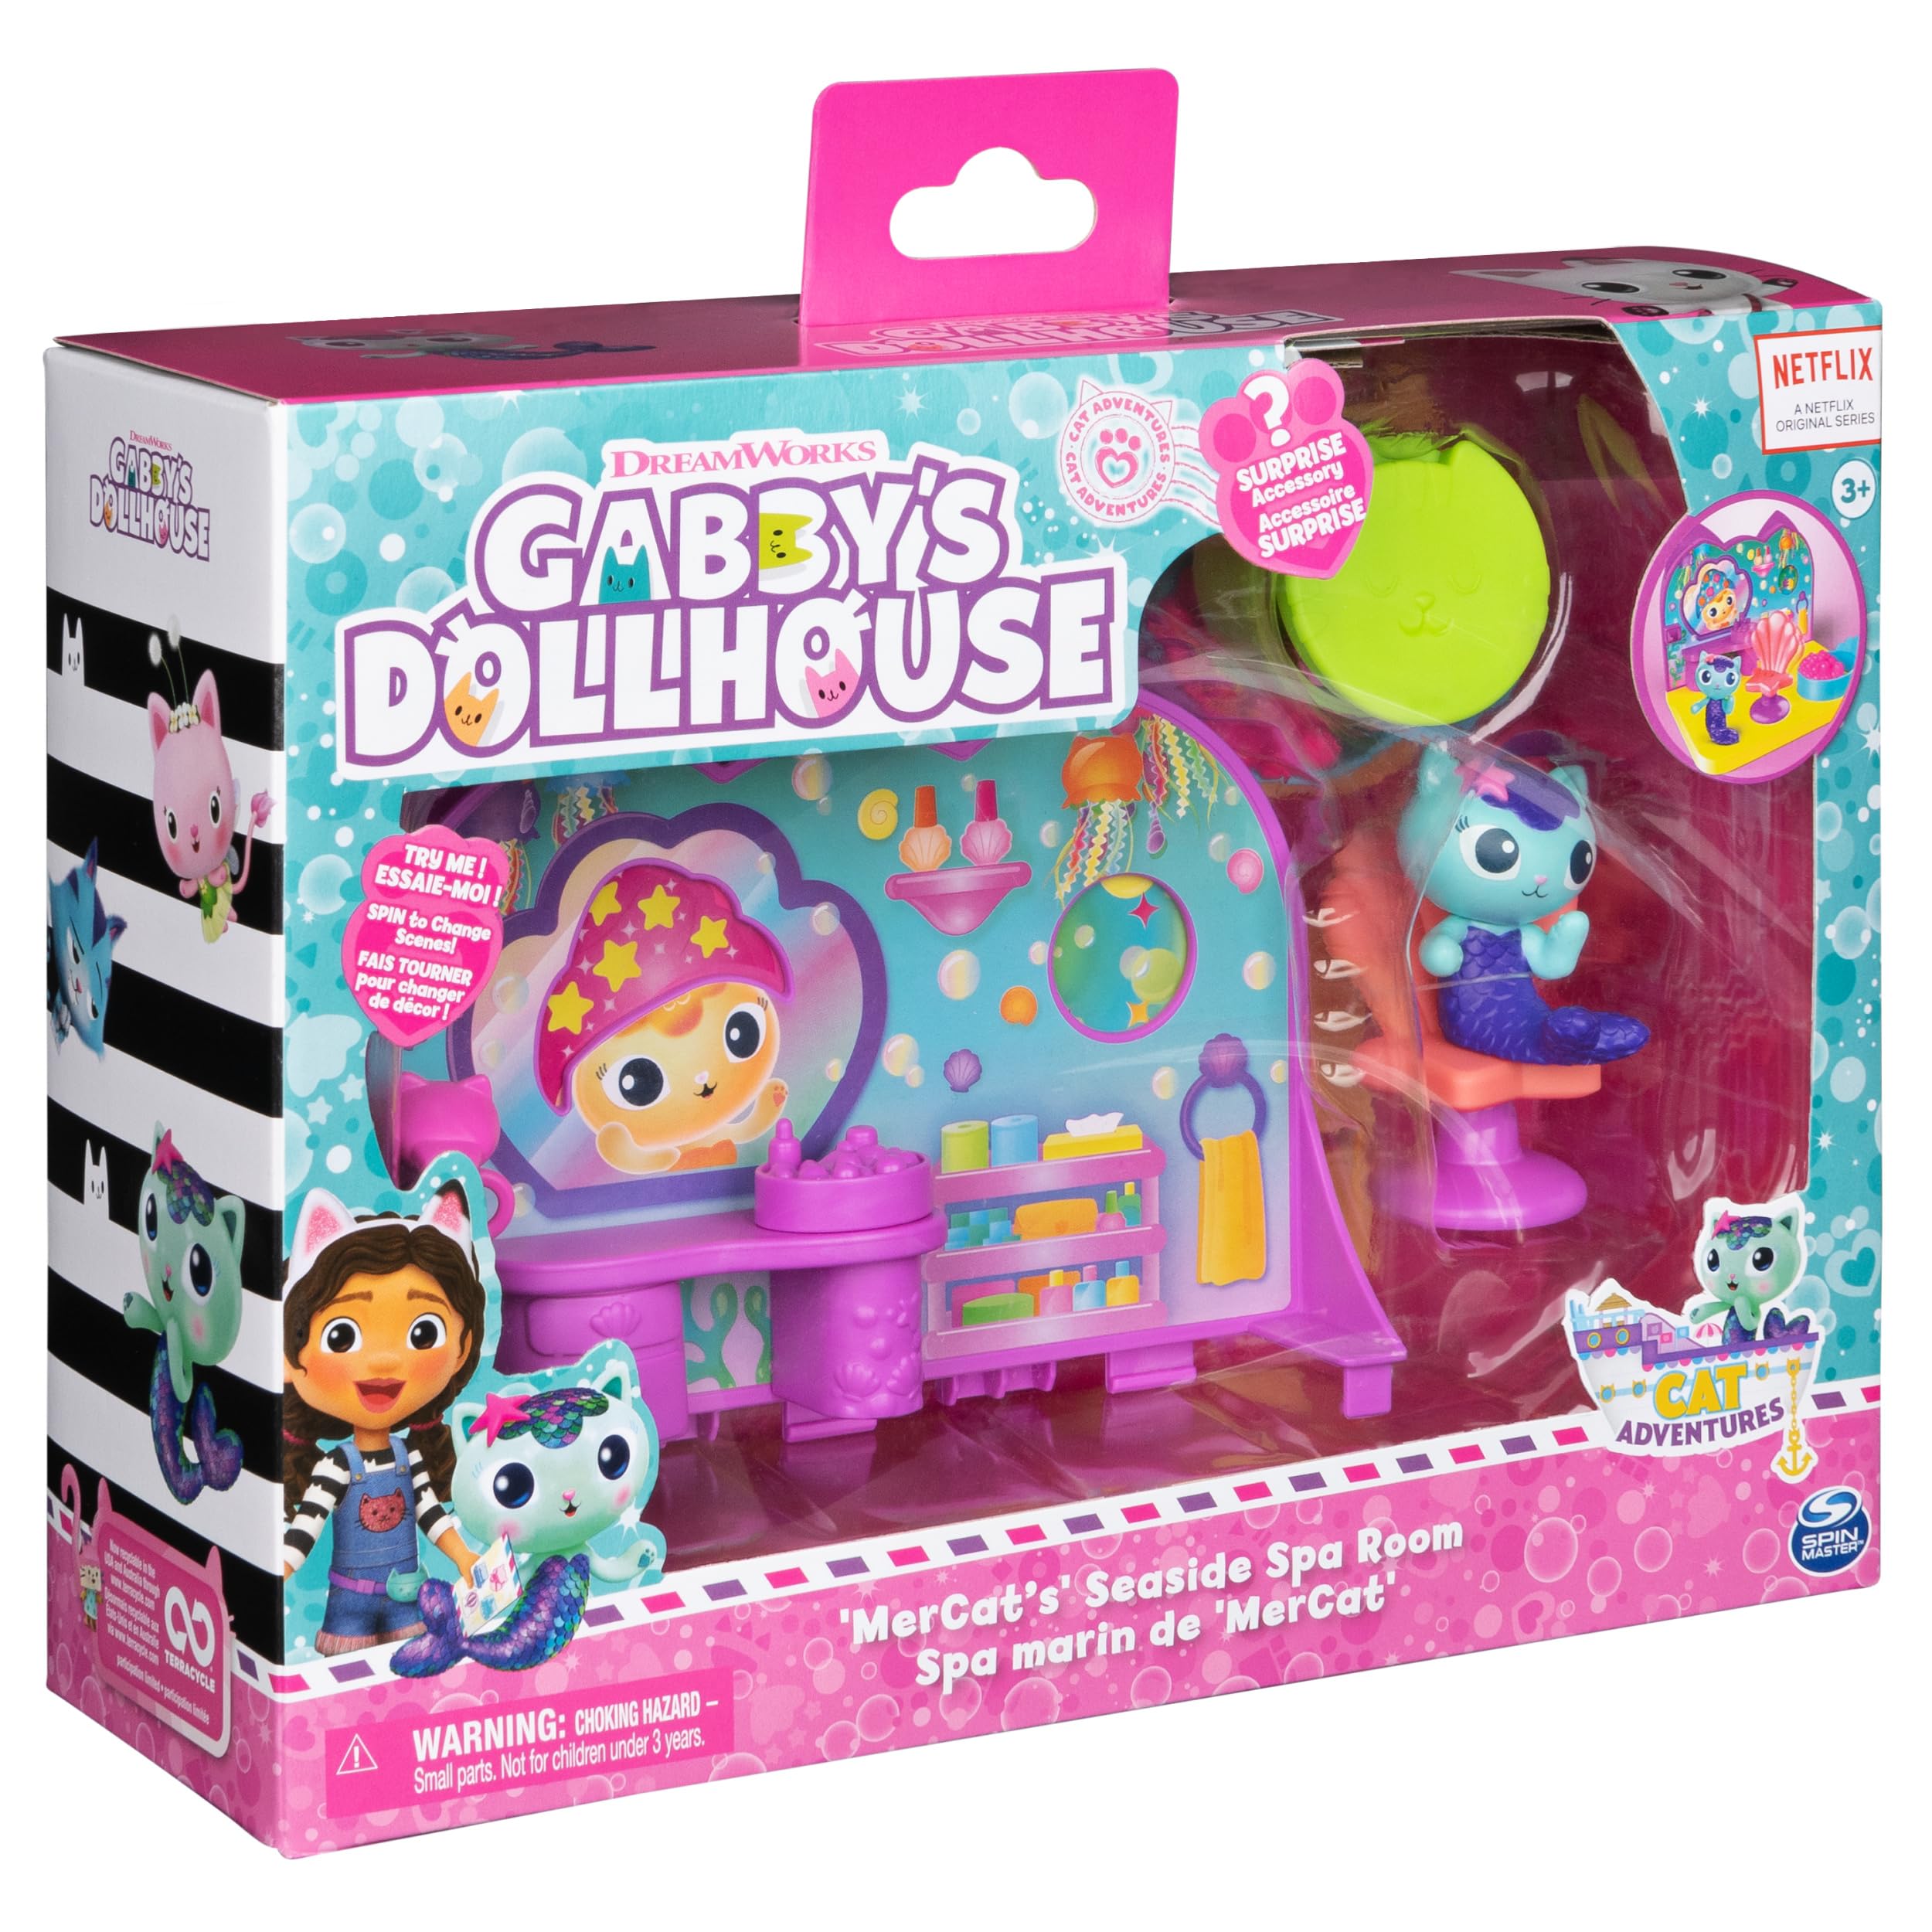 Gabby's Dollhouse DreamWorks, Mercat’s Spa Room Playset, with Mercat Toy Figure, Surprise Toys and Dollhouse Furniture, Kids Toys for Girls & Boys 3+